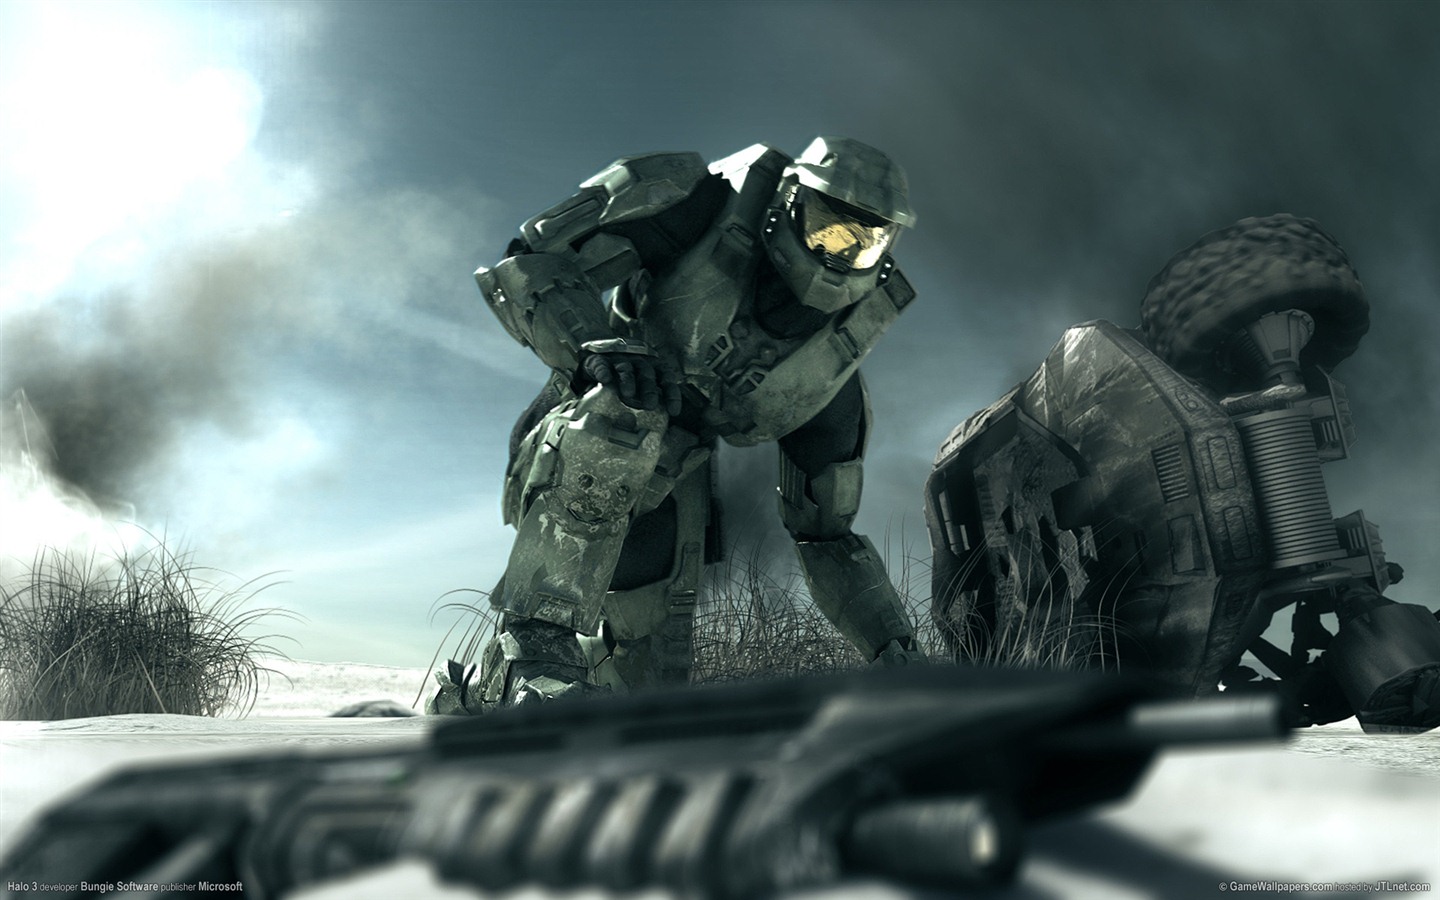 Halo game HD wallpapers #21 - 1440x900